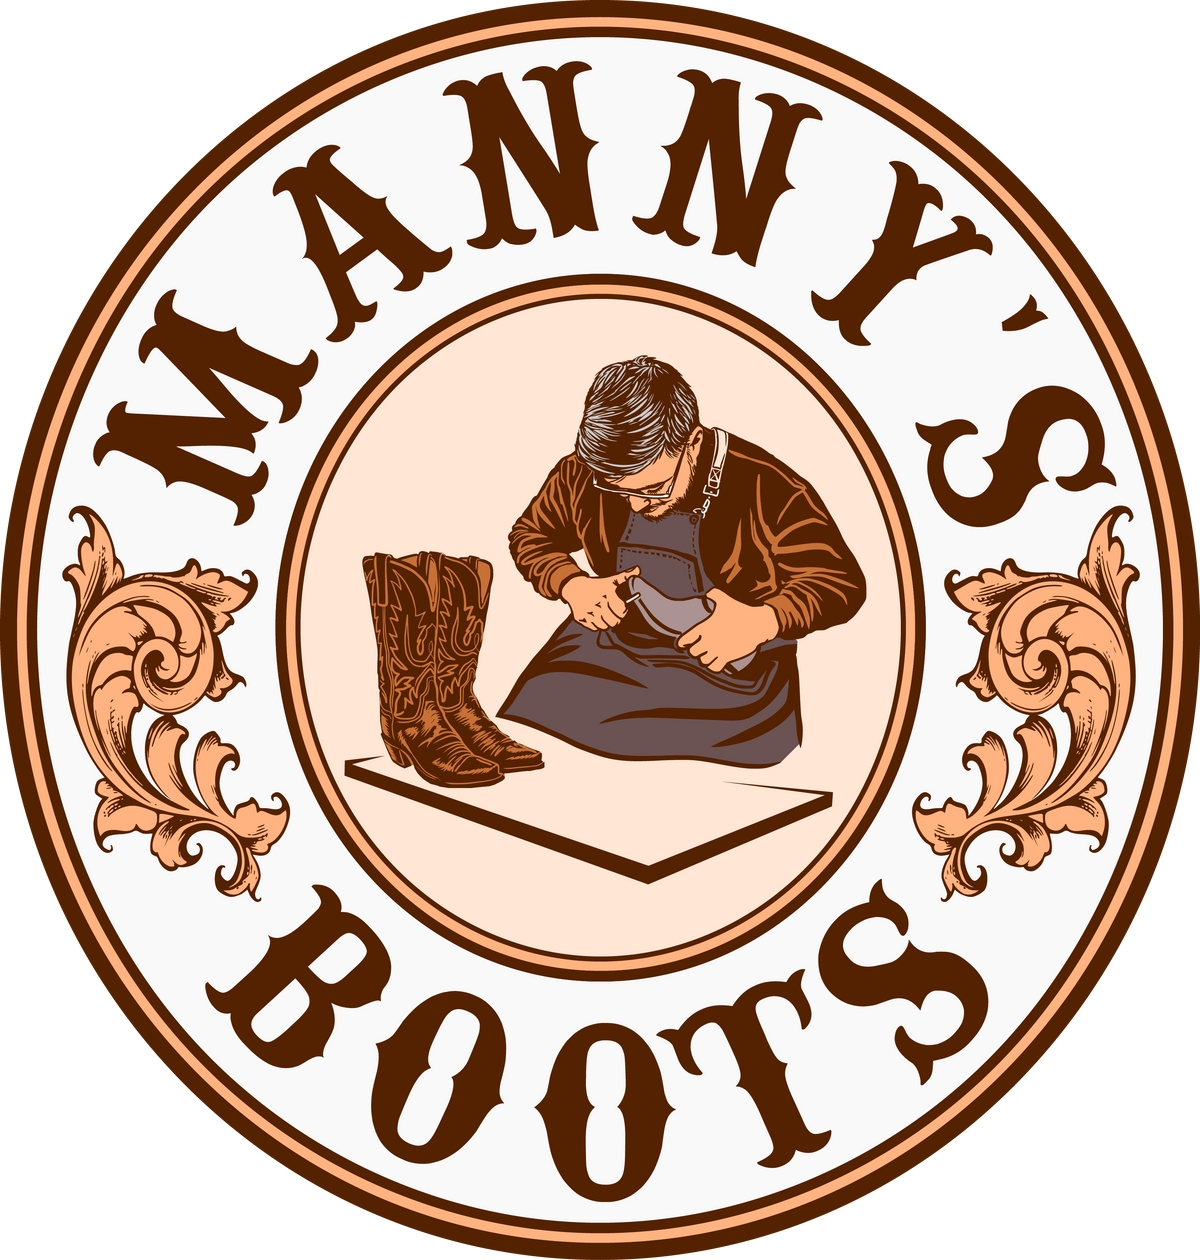 Manny's Boots - Handmade Boots - Custom Leather - Tack - USA made ...